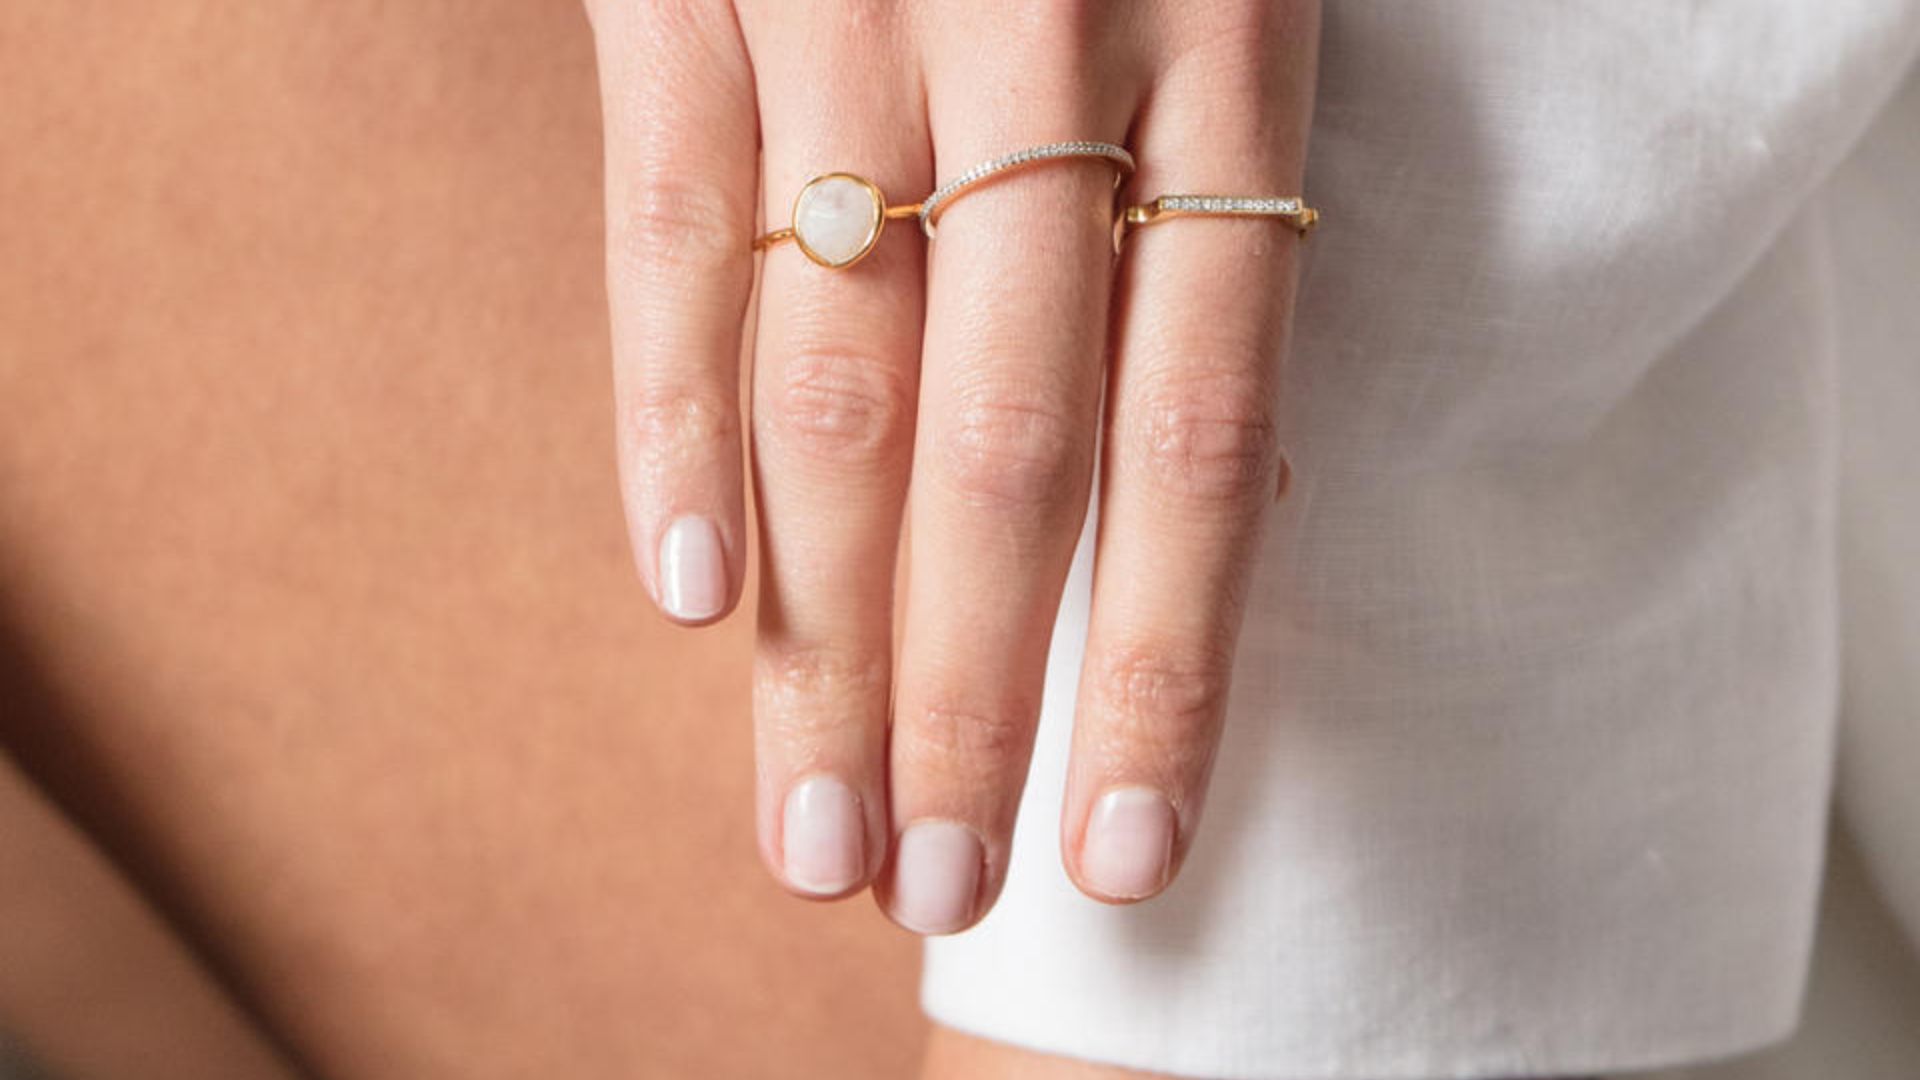 Minimalist Rings - The Timeless Charm Of Beauty